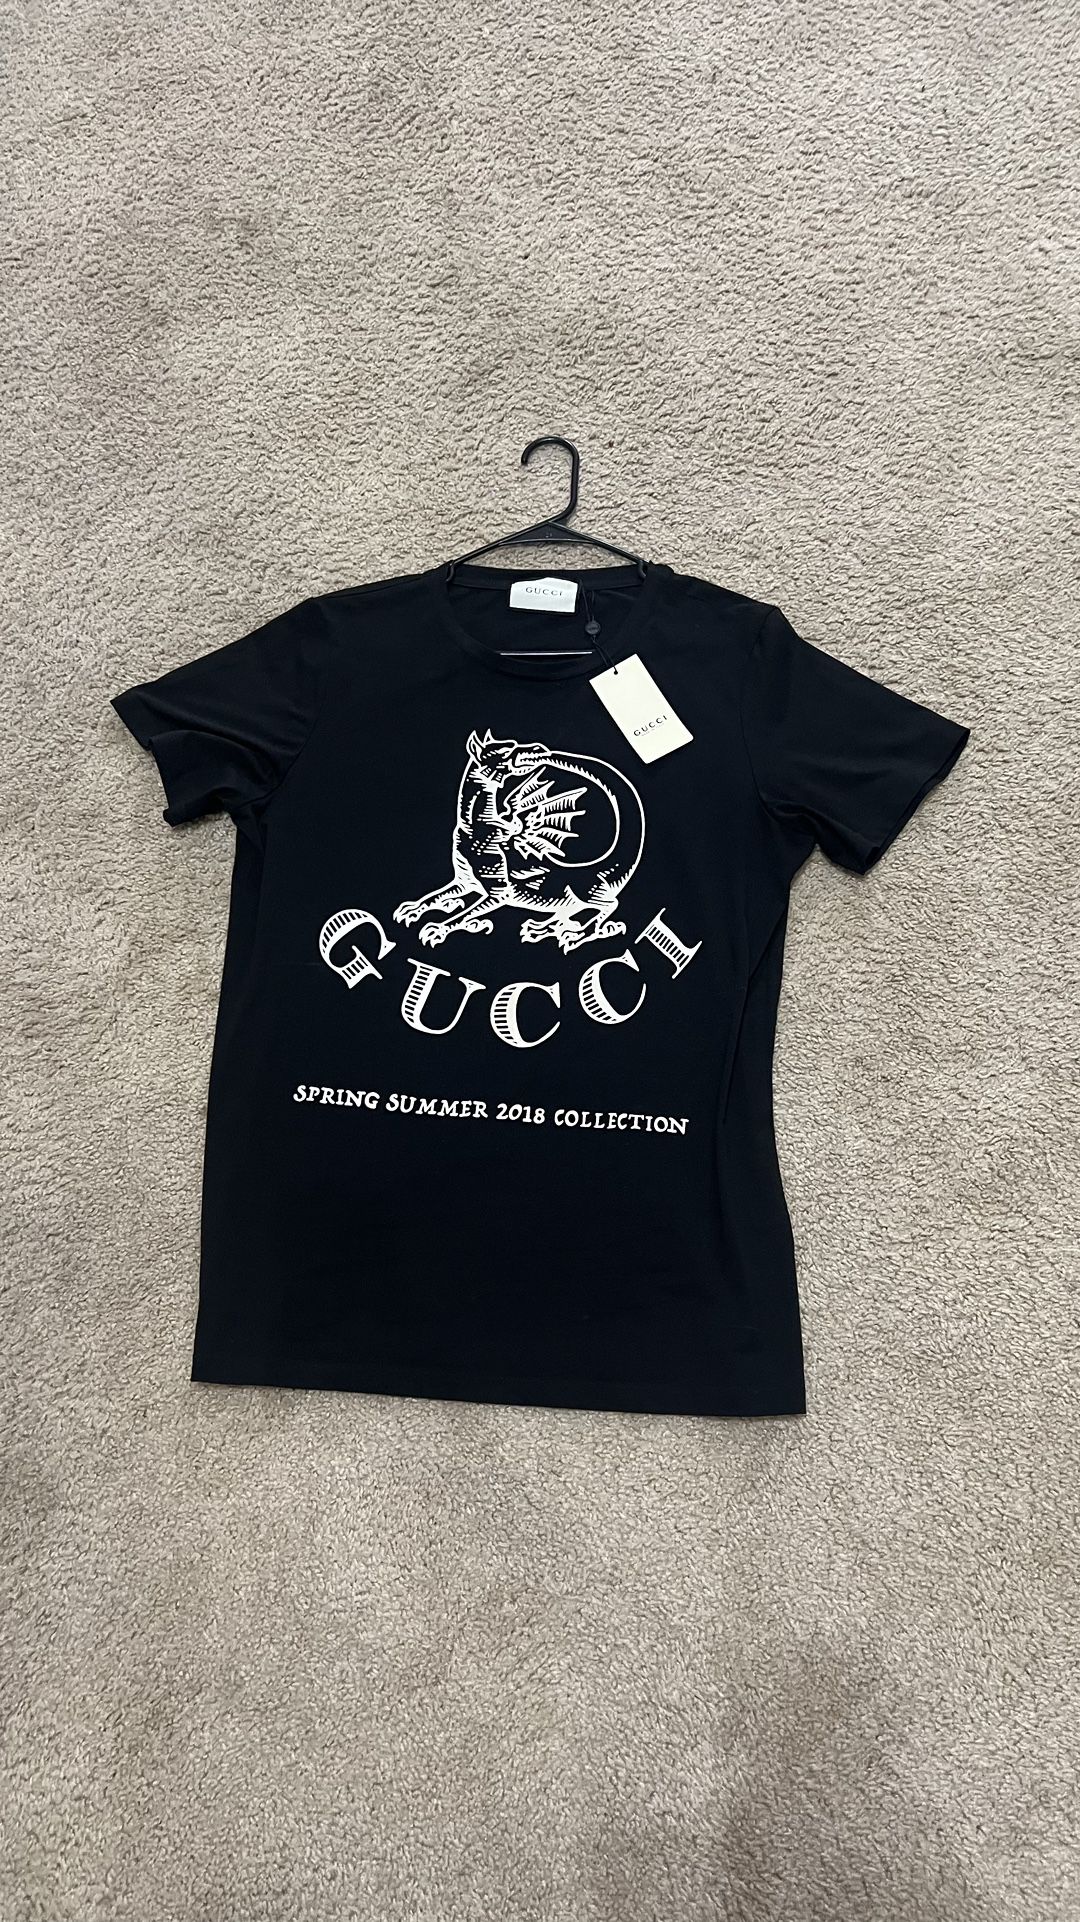 Gucci SS18 Collection T-shirt